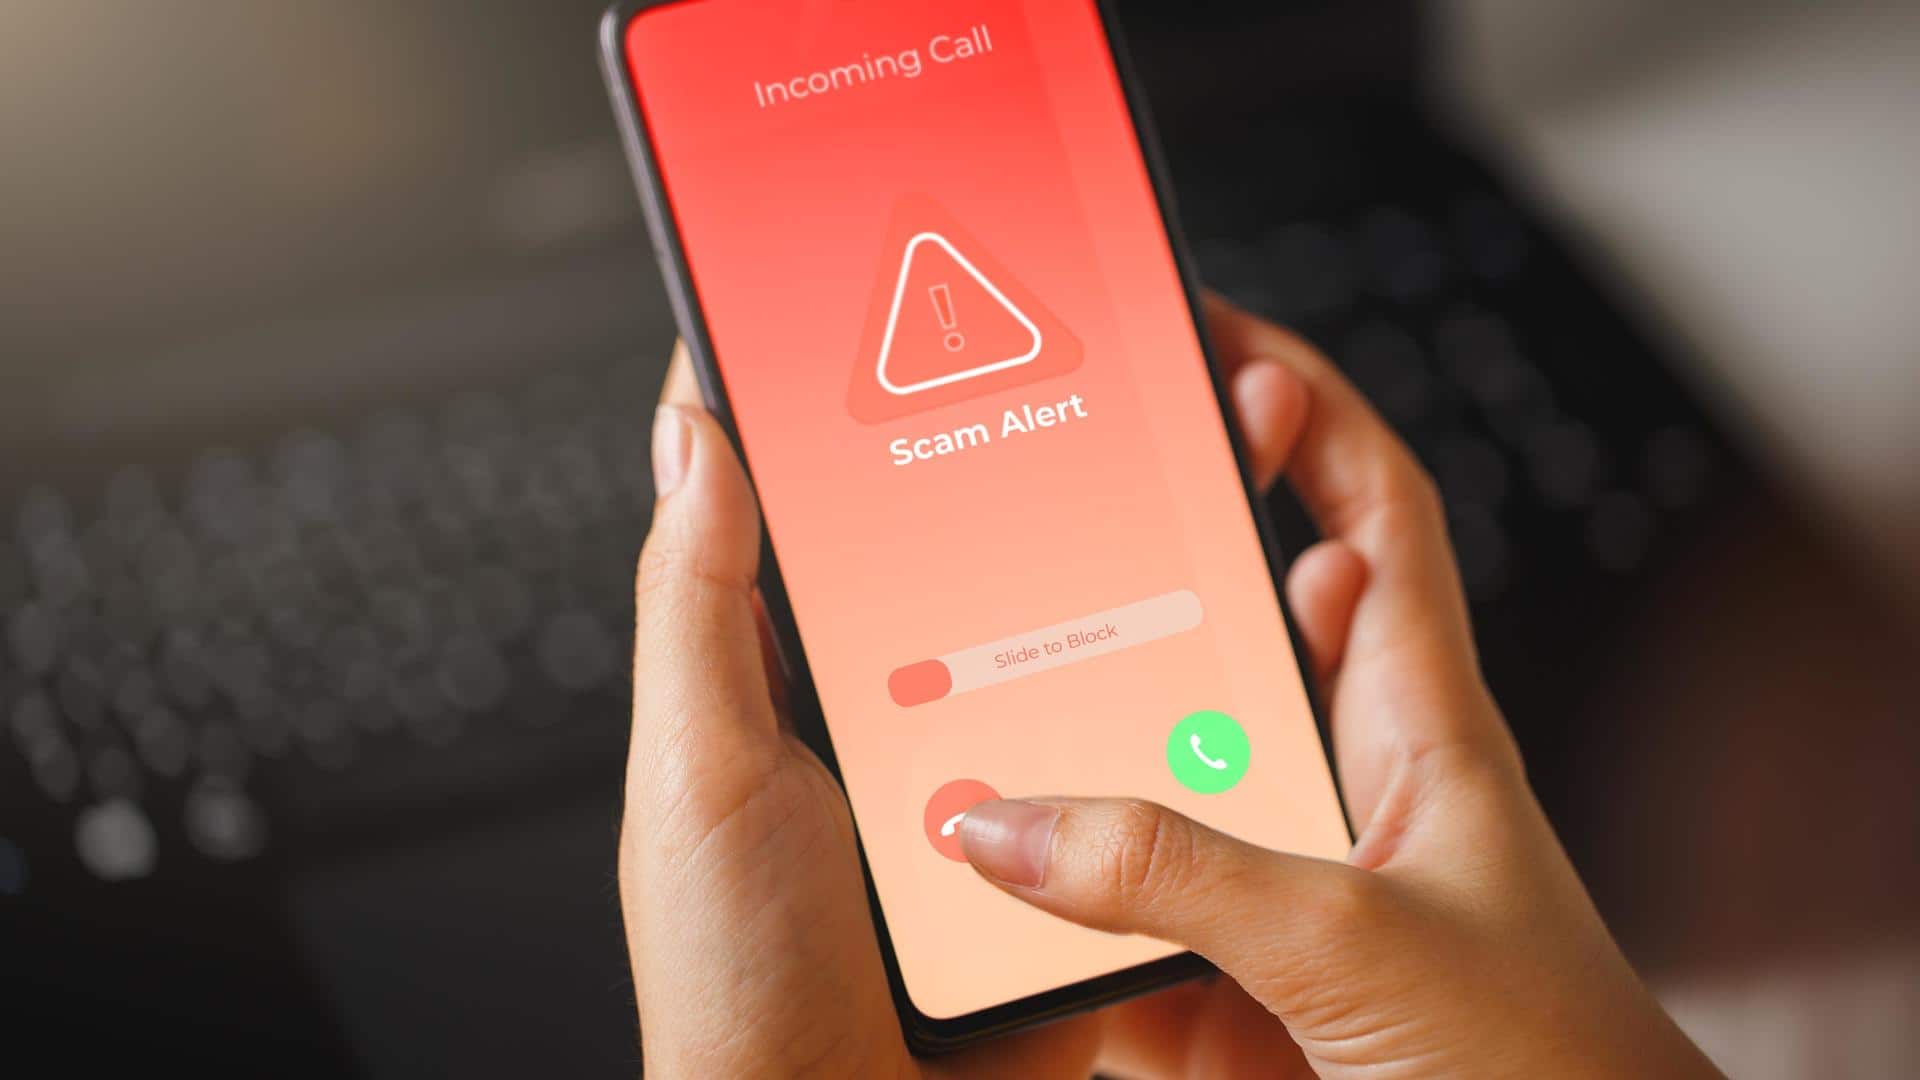 Beware of calls from unknown numbers starting with +92